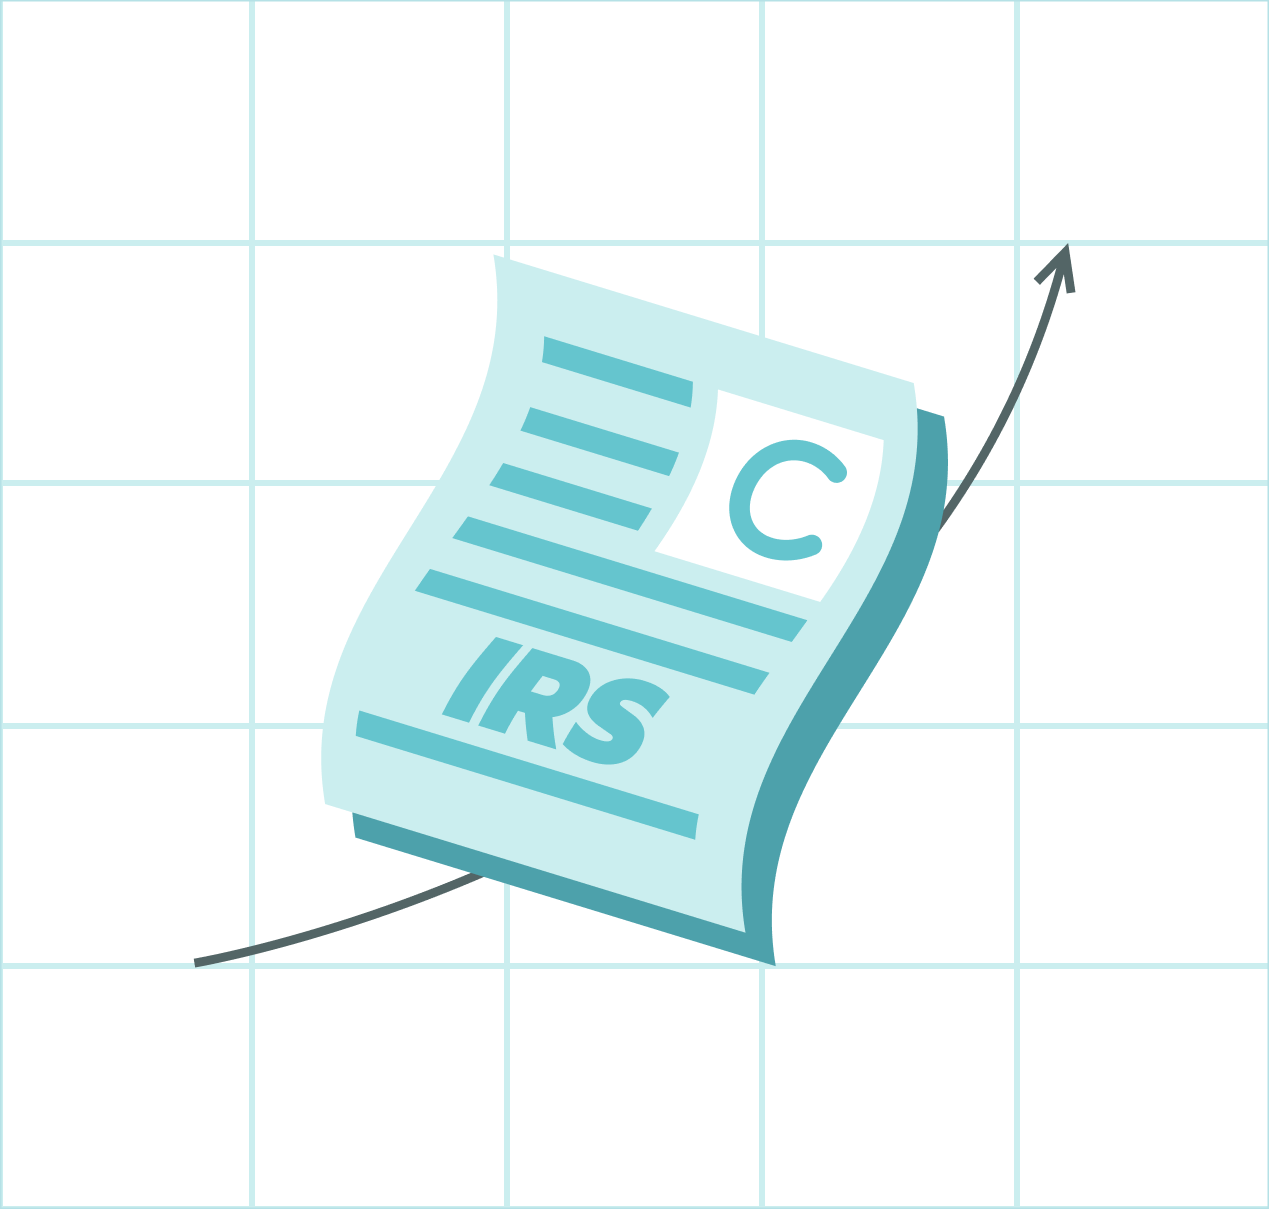 Lili generates a pre-filled Schedule C form, to make filing taxes easier for self-proprietors.